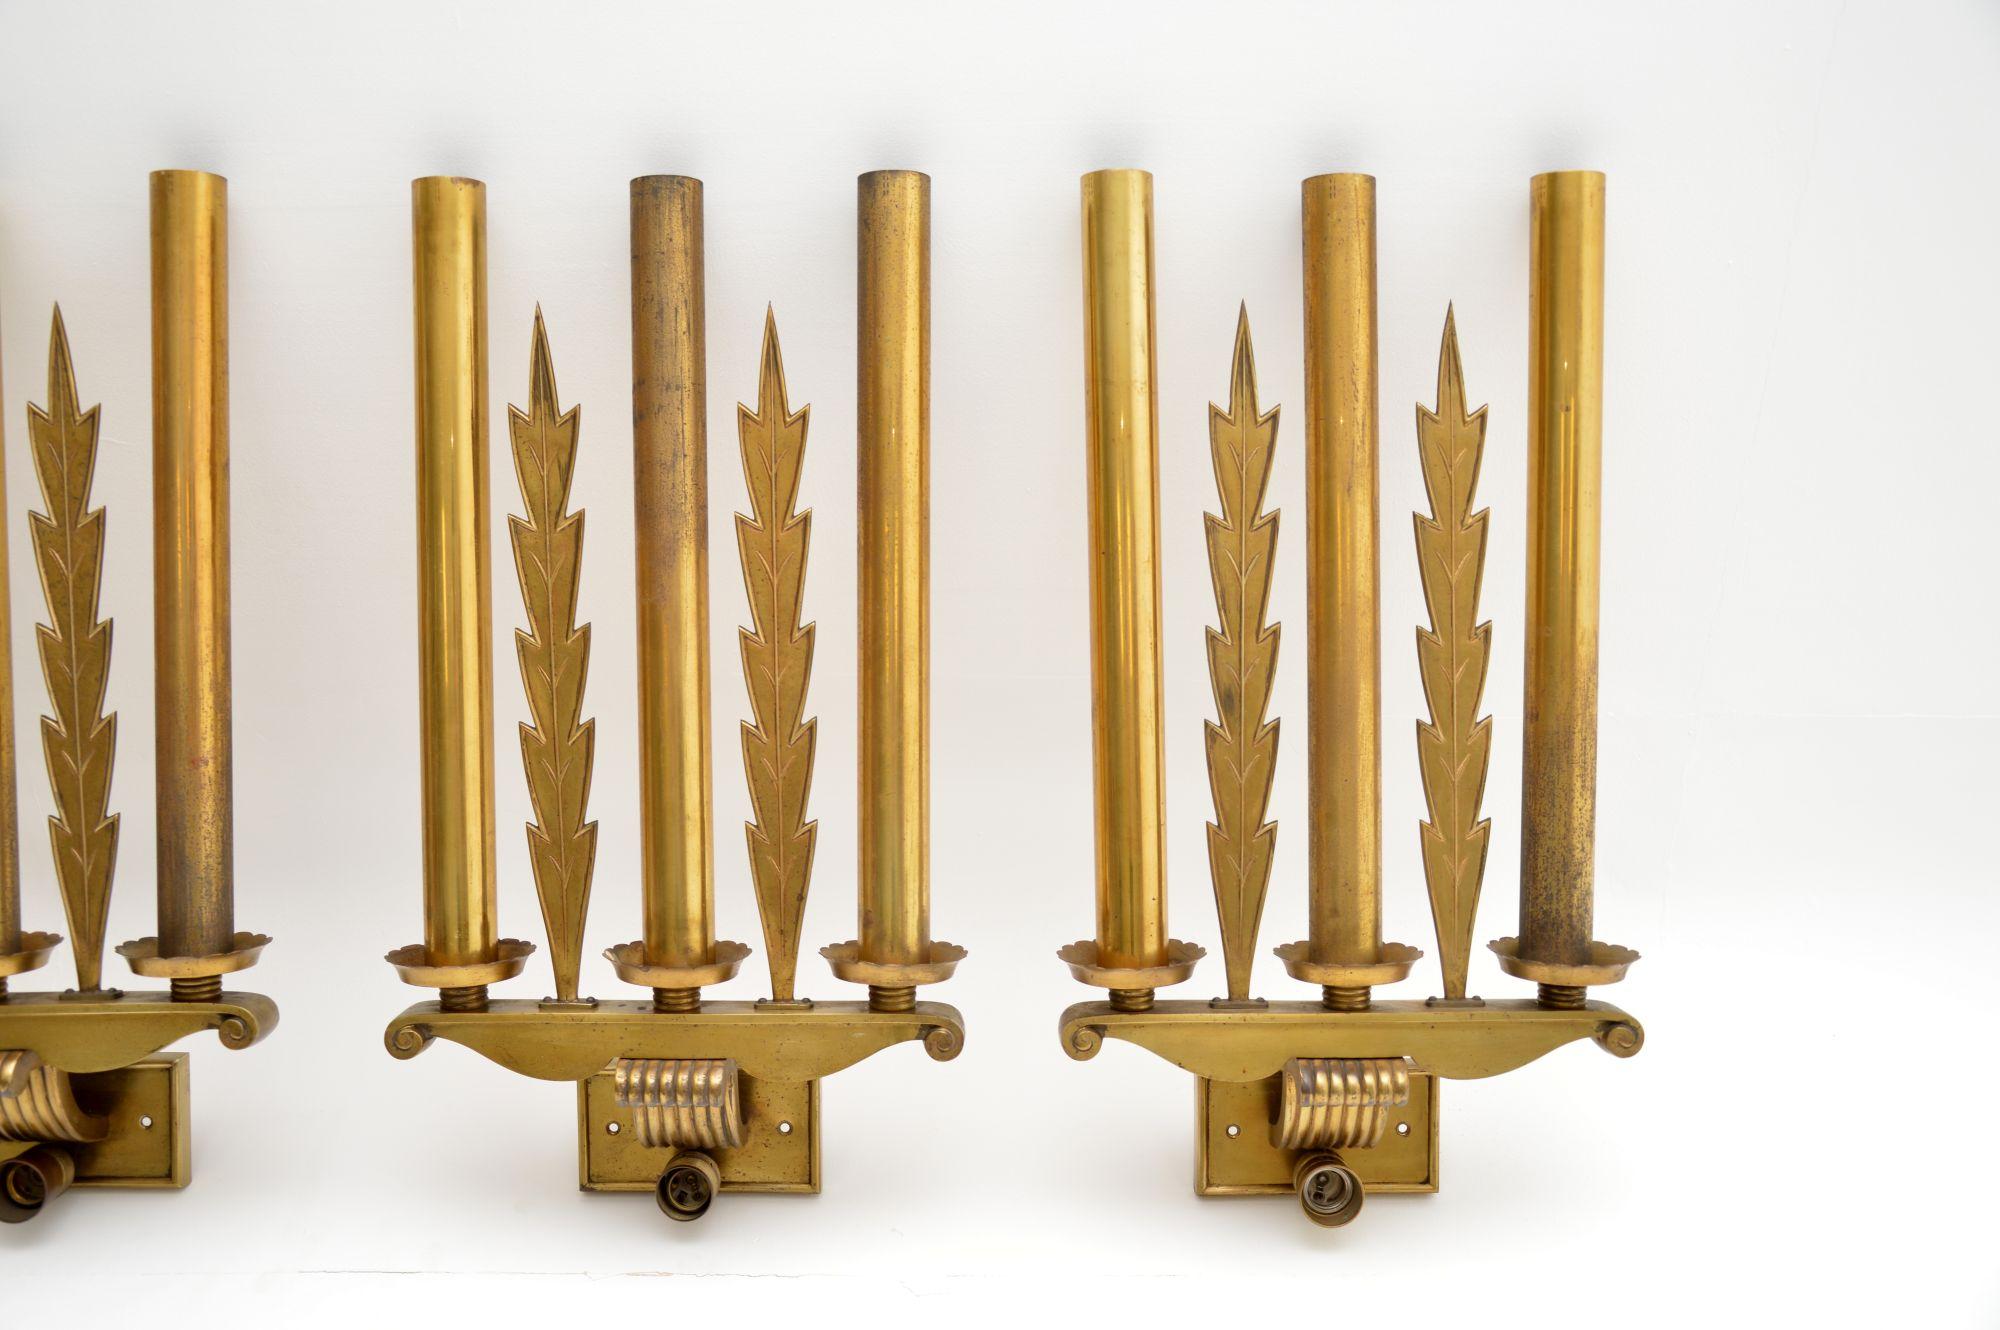 Set of 5 Antique Neoclassical Brass Wall Sconce Lights 2